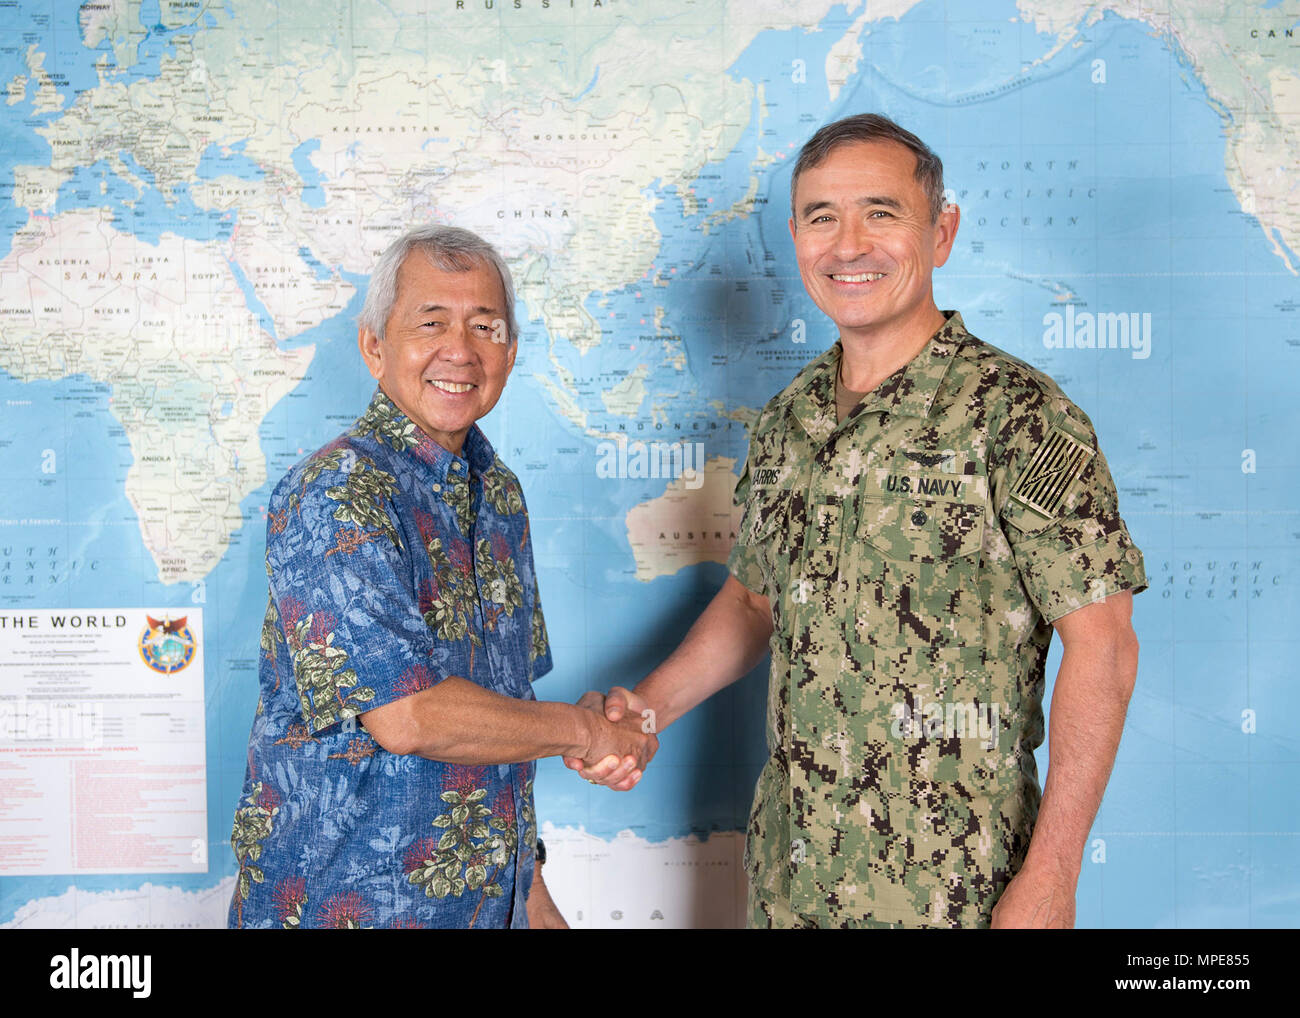 170210-N-DX698-007 CAMP H.M. SMITH, Hawaii (Feb. 10, 2017) Commander of U.S. Pacific Command (USPACOM) Adm. Harry Harris, meets with Republic of the Philippines Secretary of Foreign Affairs, His Excellency Perfecto R. Yasay Jr. at USPACOM headquarters.  The meeting provided a venue for officials to discuss and reaffirm the importance of the U.S.-Philippines alliance and the continued security relationship between both nations.   (U.S. Navy photo by Mass Communication Specialist 1st Class Jay M. Chu/Released) Stock Photo